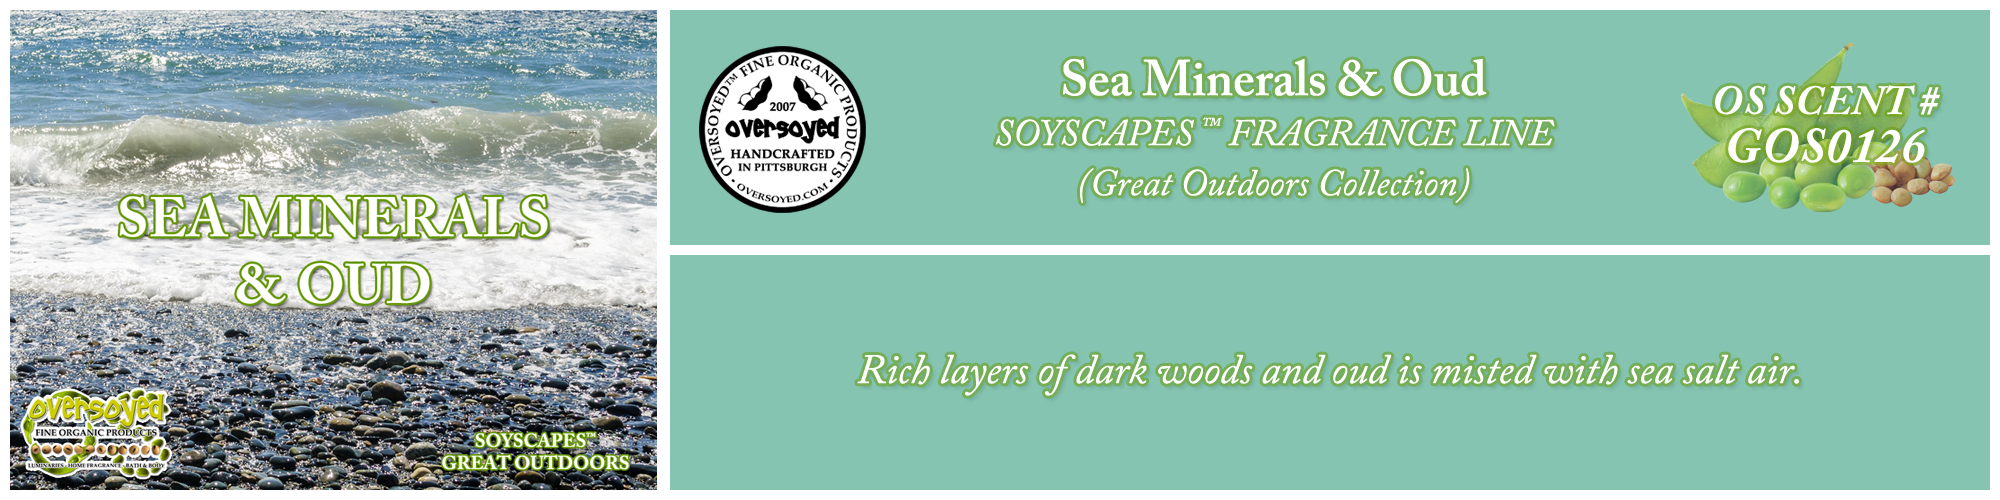 Sea Minerals & Oud Handcrafted Products Collection